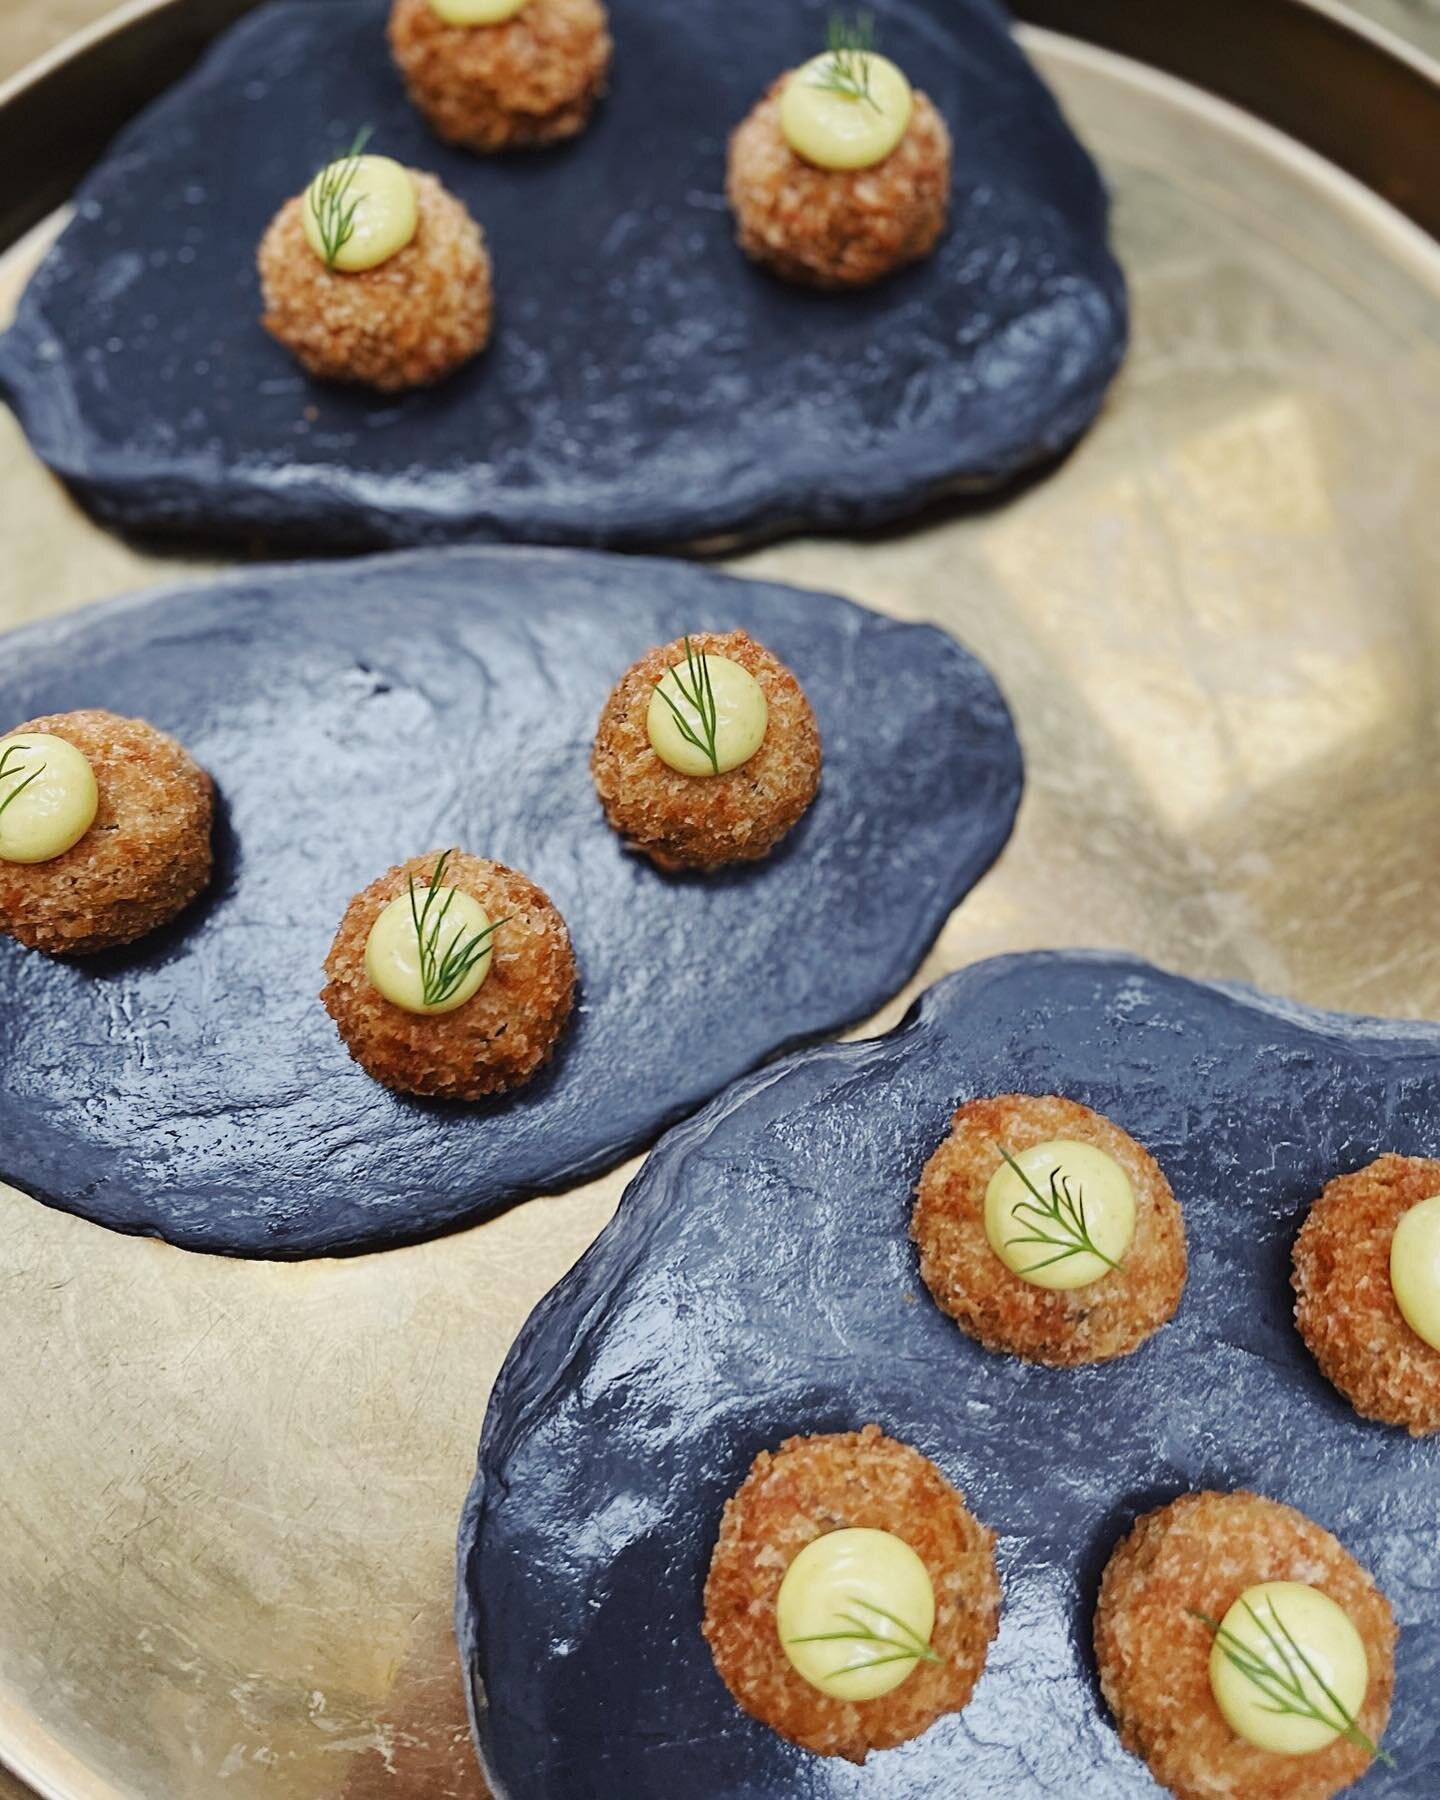 Canap&eacute; - Fishcake 🐟🌿

Mini cod &amp; dill fish cake topped with a curry mayonnaise 👨&zwj;🍳

#theseasonkitchen #cotswoldsprivatechef #privatechefcotswolds #privatechefuk #privatechef #cotswoldschef #personalchef #personalchefservices